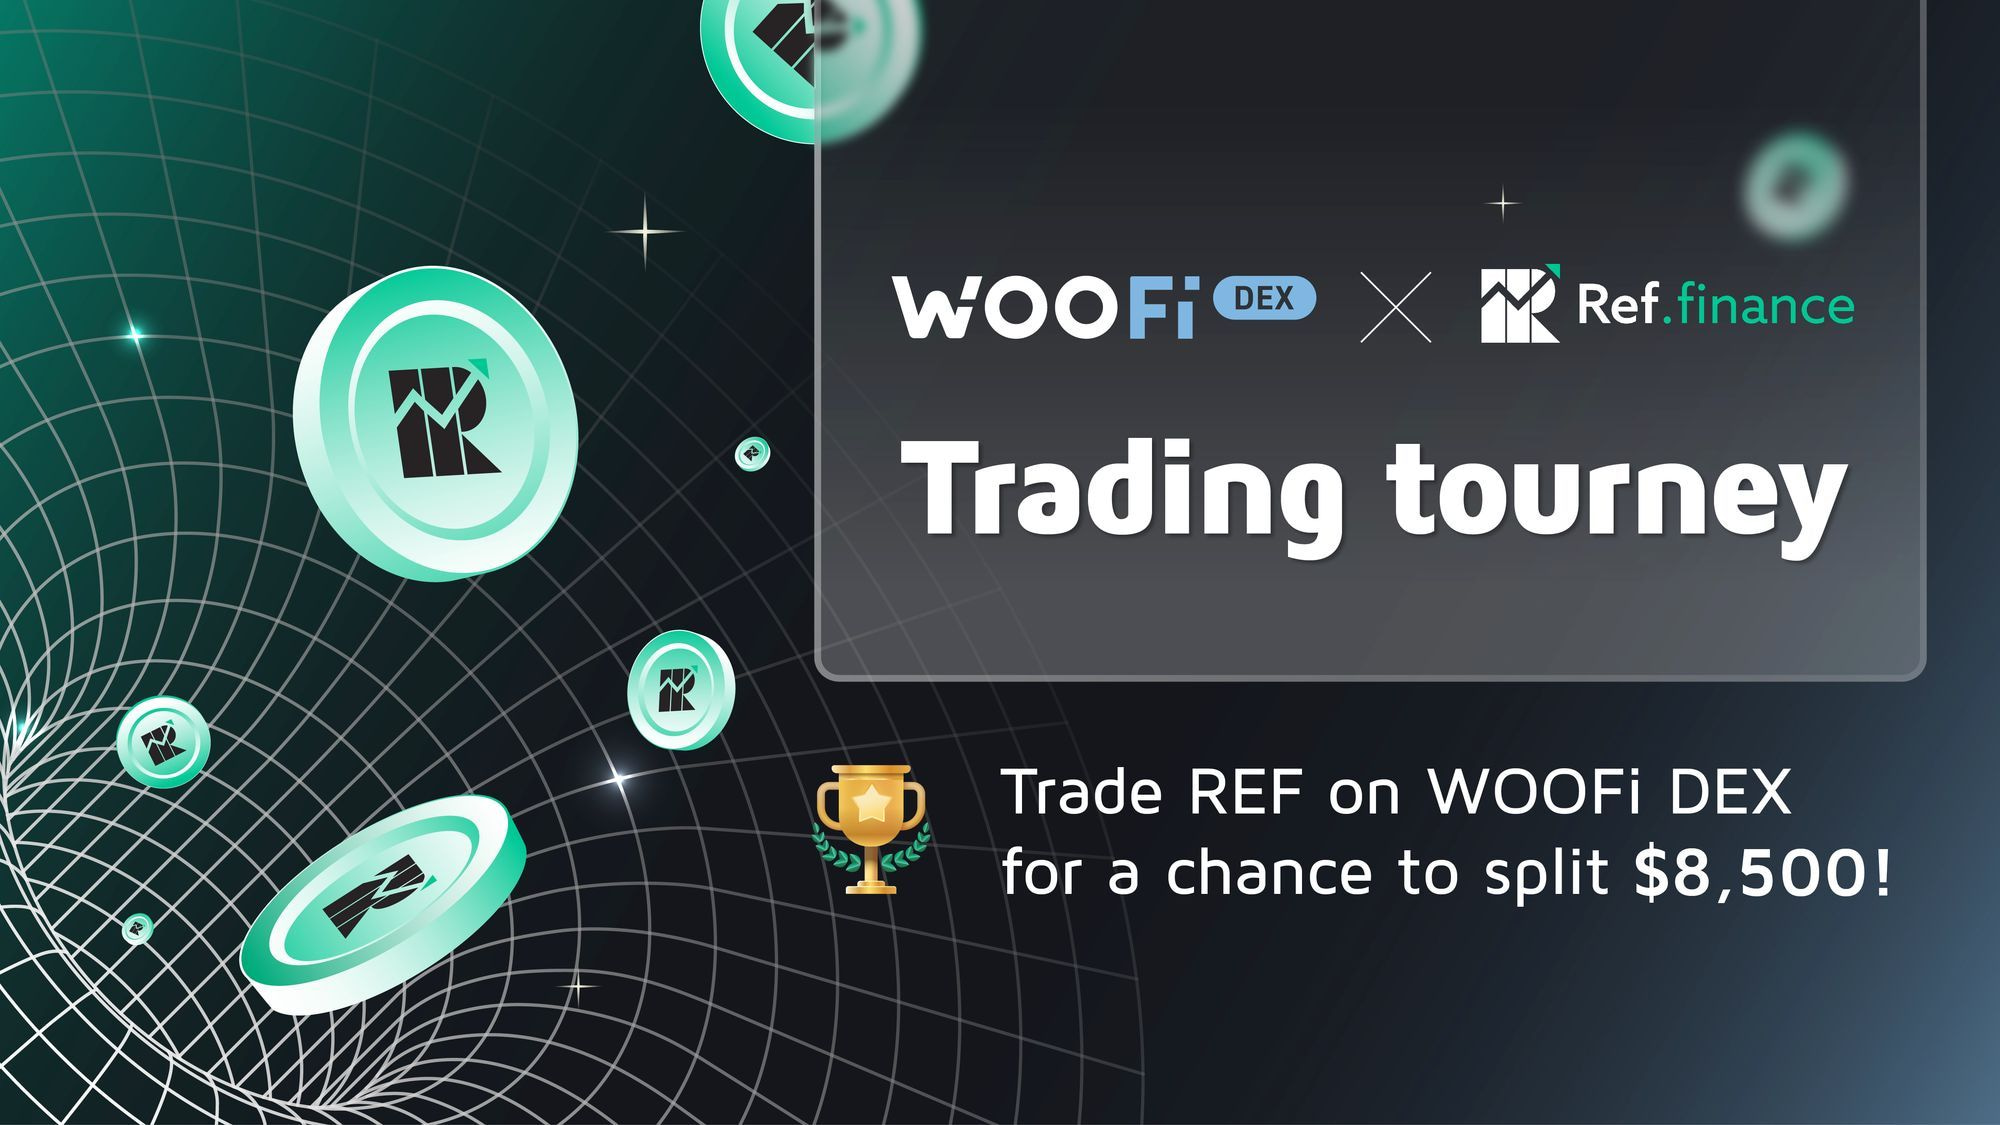 WOOFi DEX and Ref Finance launch a trading tourney with $8,500 of REF prizes!